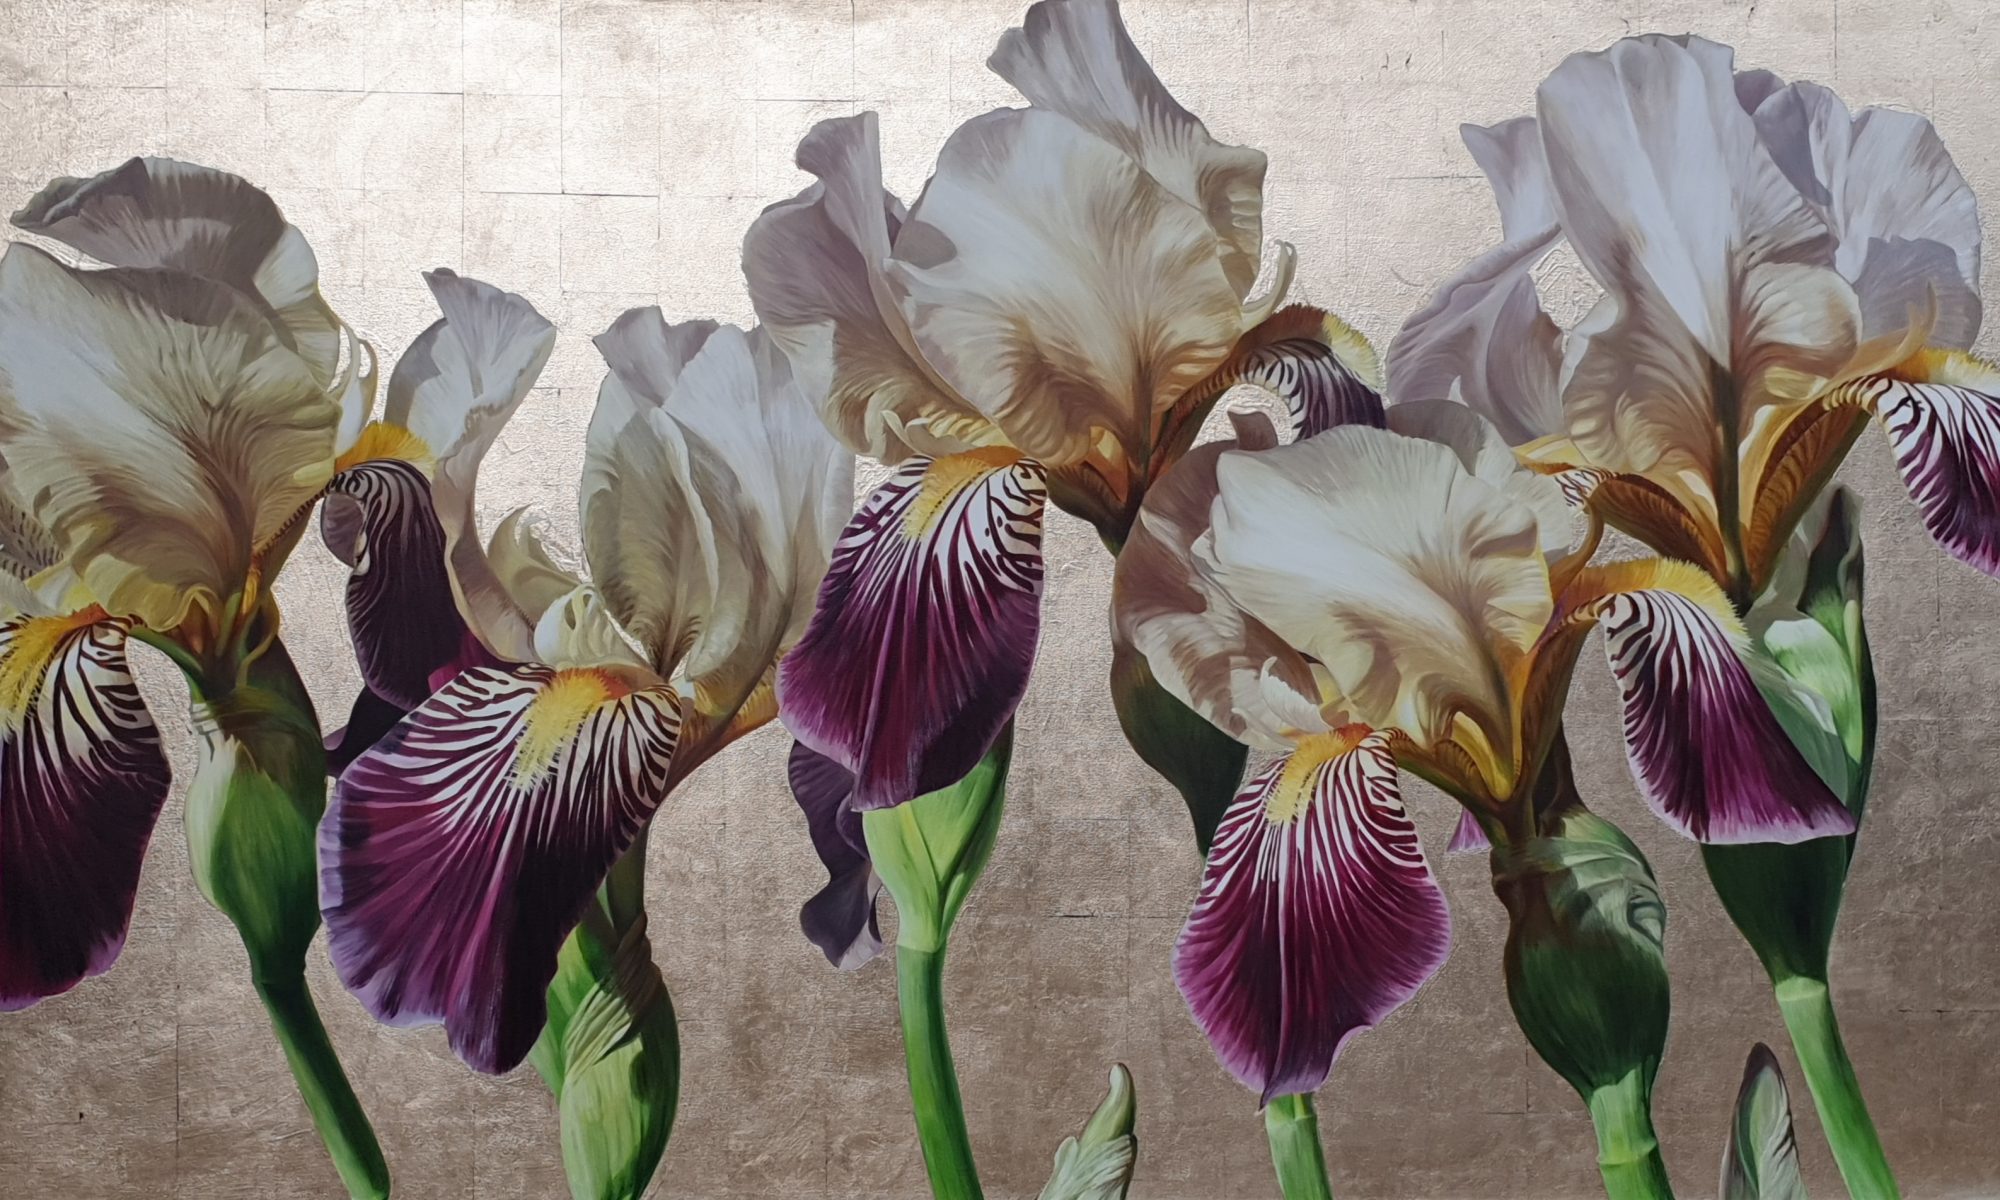 Original acrylic painting by Sarah Caswell, 'Five' Bearded iris ‘Lorelei’ in bright sunshine. On 22.5ct moon goldleaf and cotton canvas.